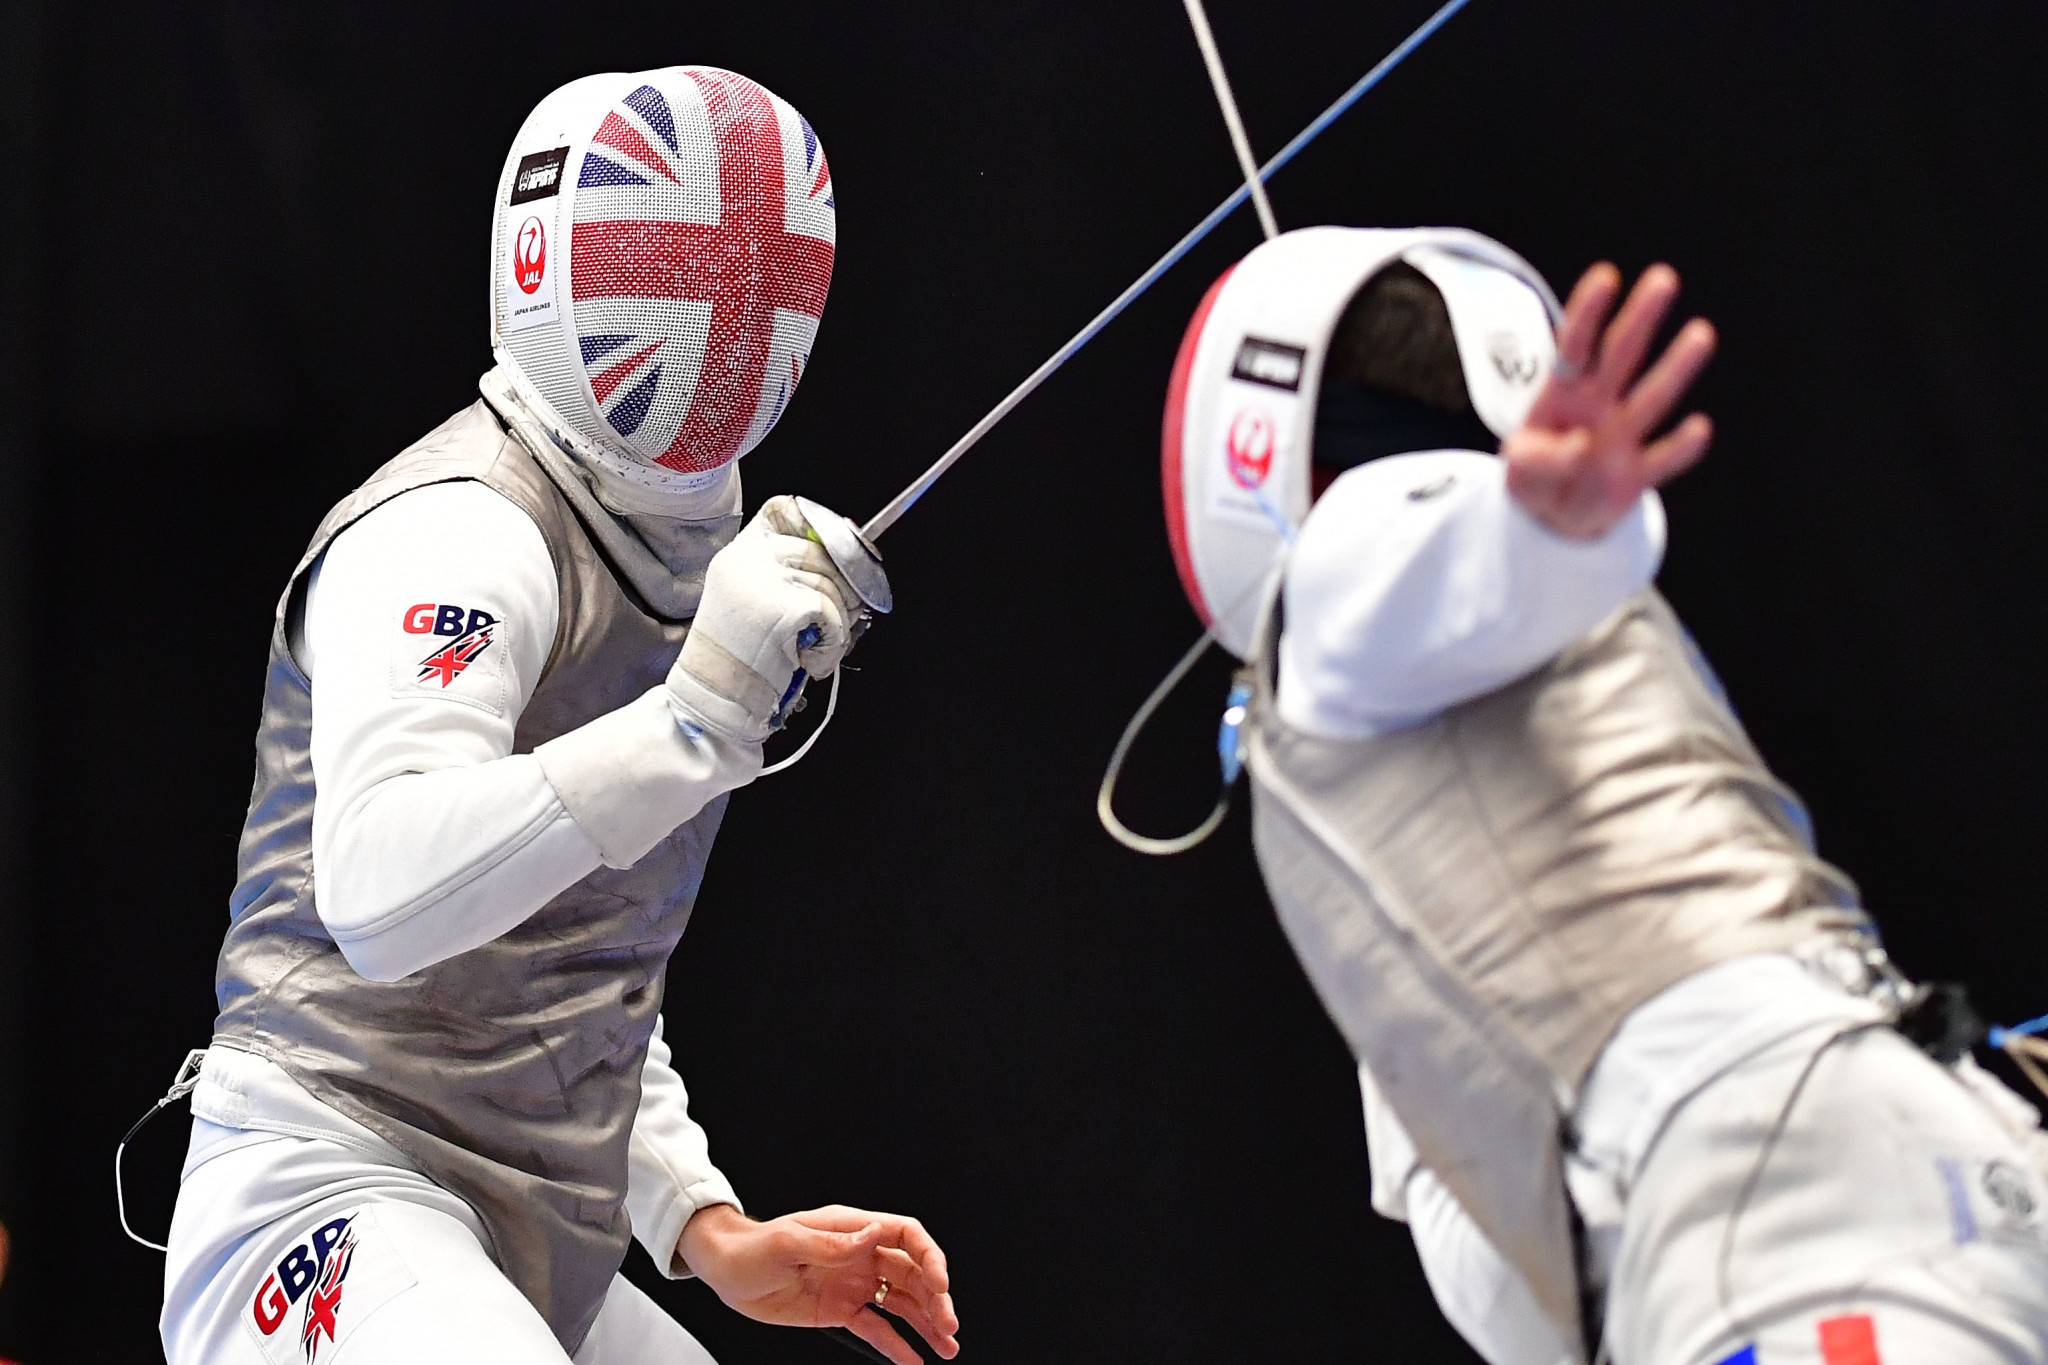 World number one fencer Richard Kruse has been backed with additional funding ©Getty Images